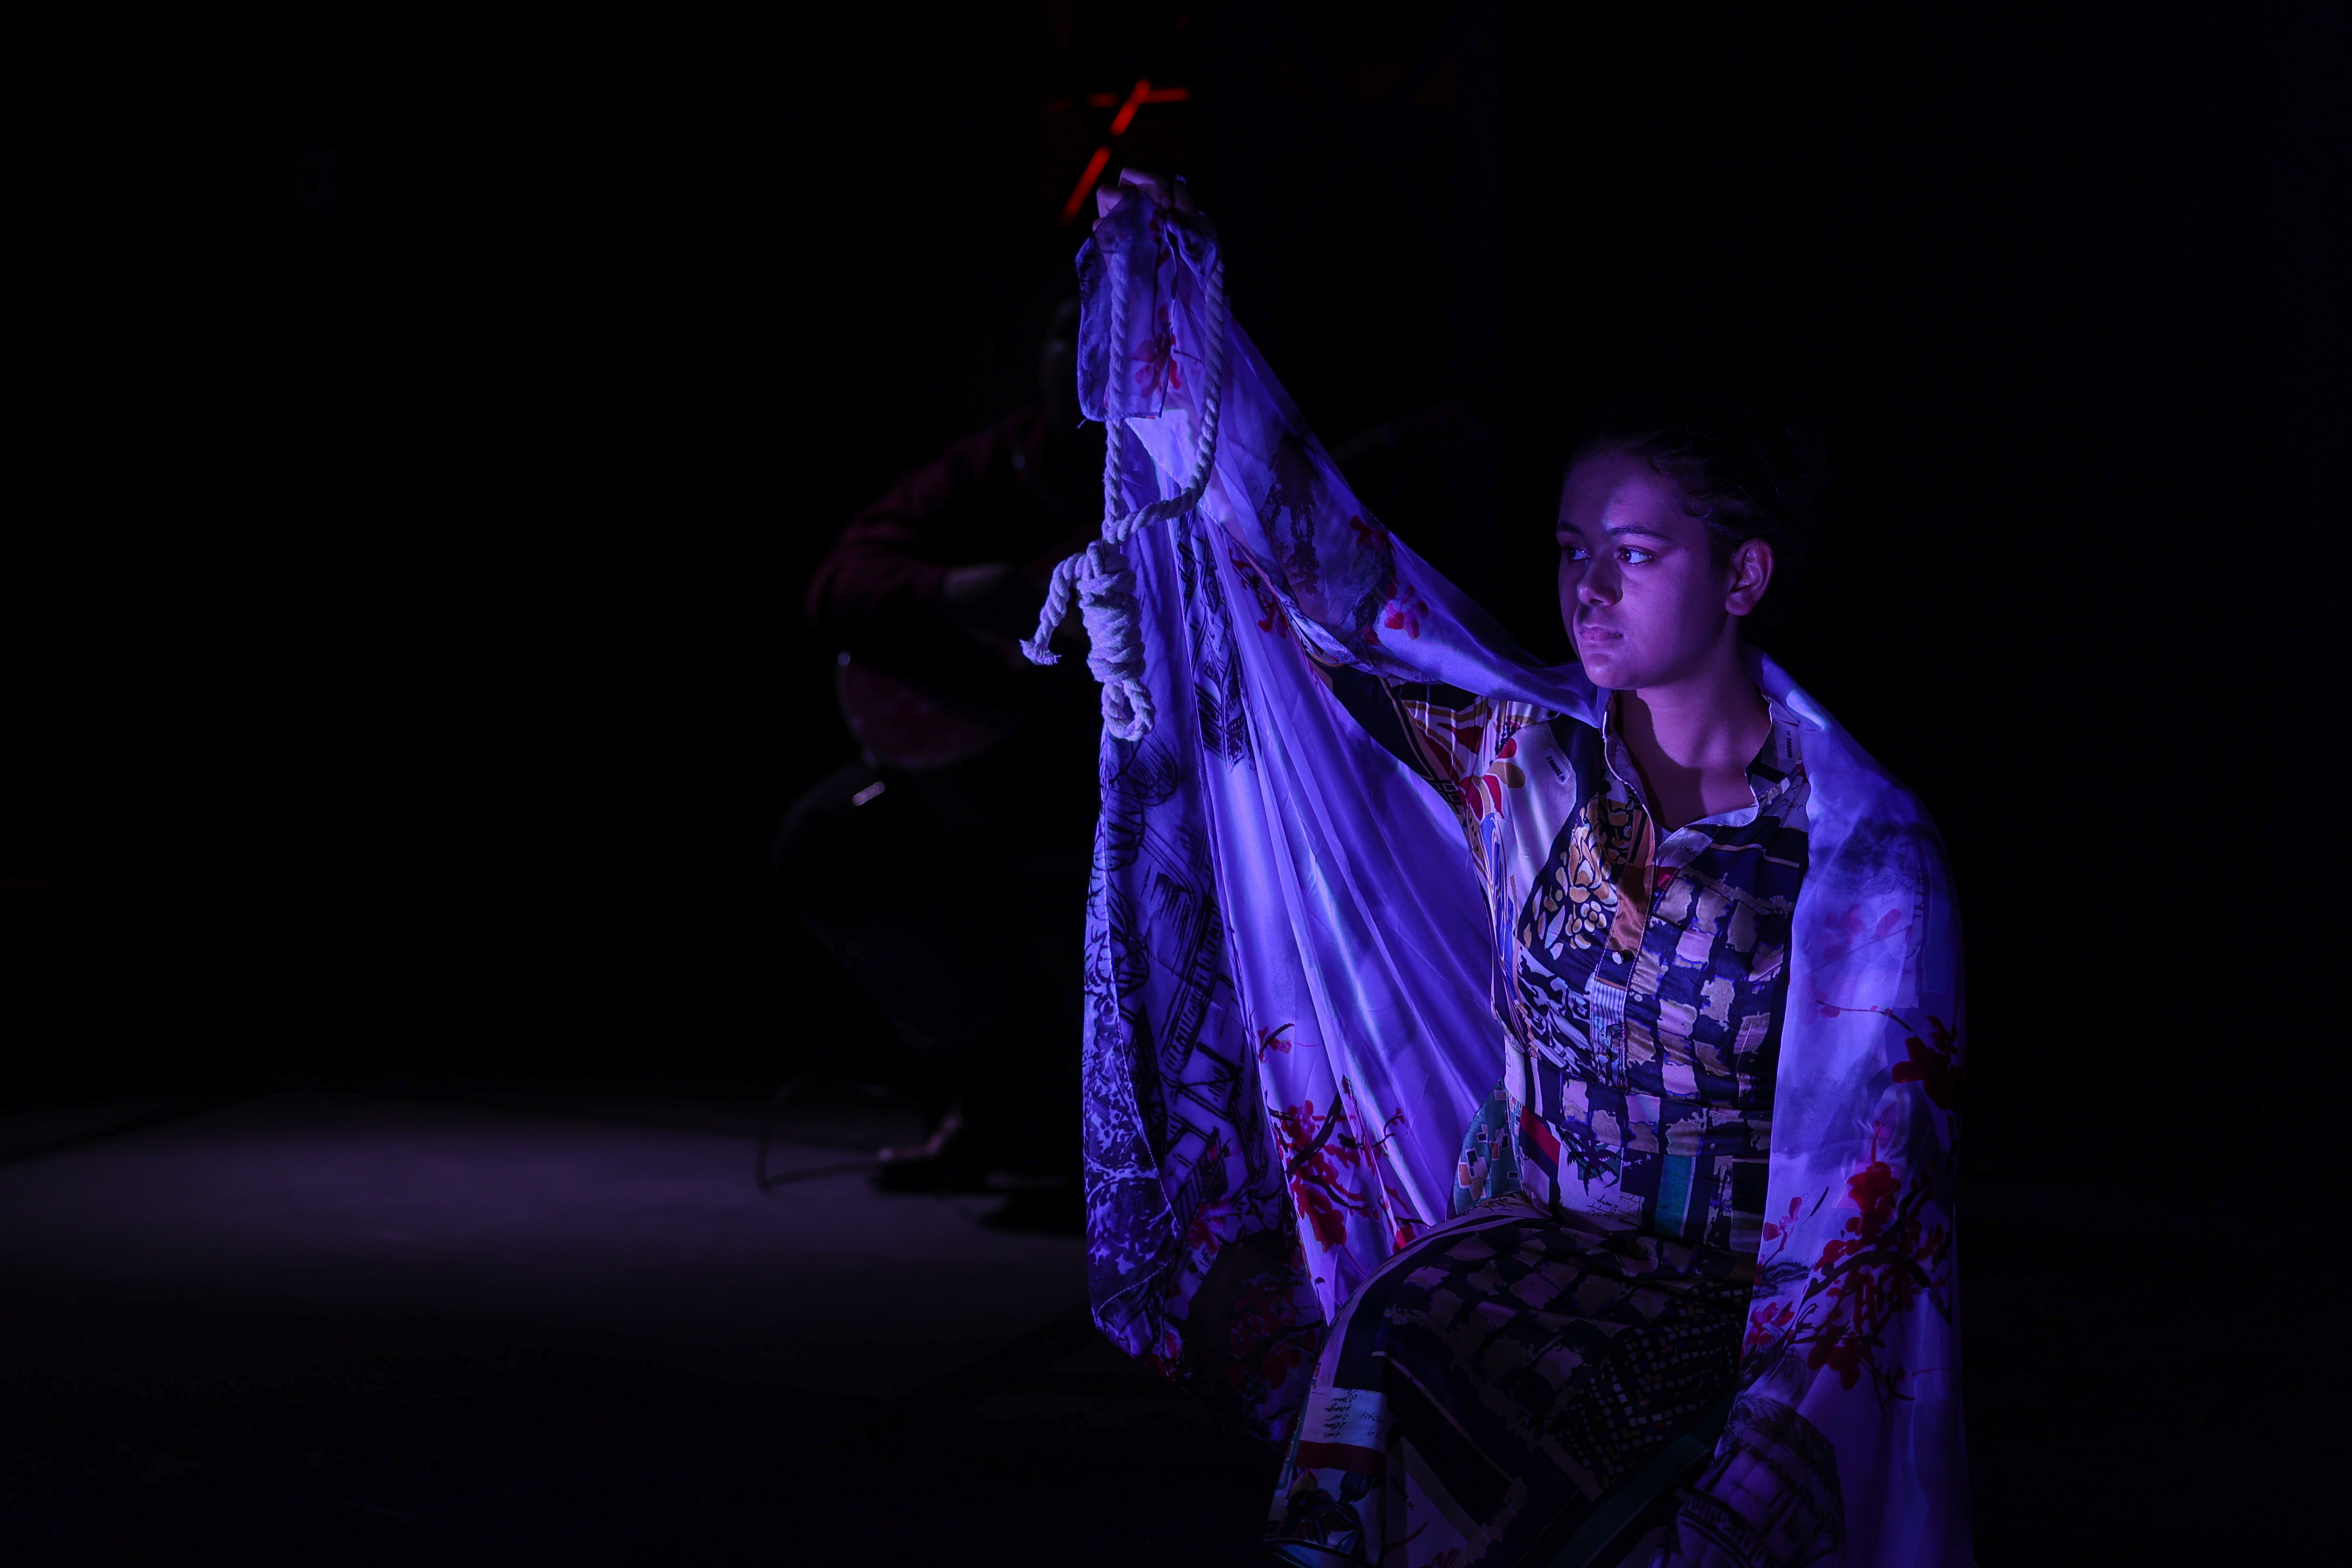 Production photo for: FireDance
by Chiori Miyagawa ADVISORY – This show contains strong language and references to suicide.
RESERVE YOUR TICKETS NOW:
https://forms.gle/Y1zWWEDuuxxEa9dT8